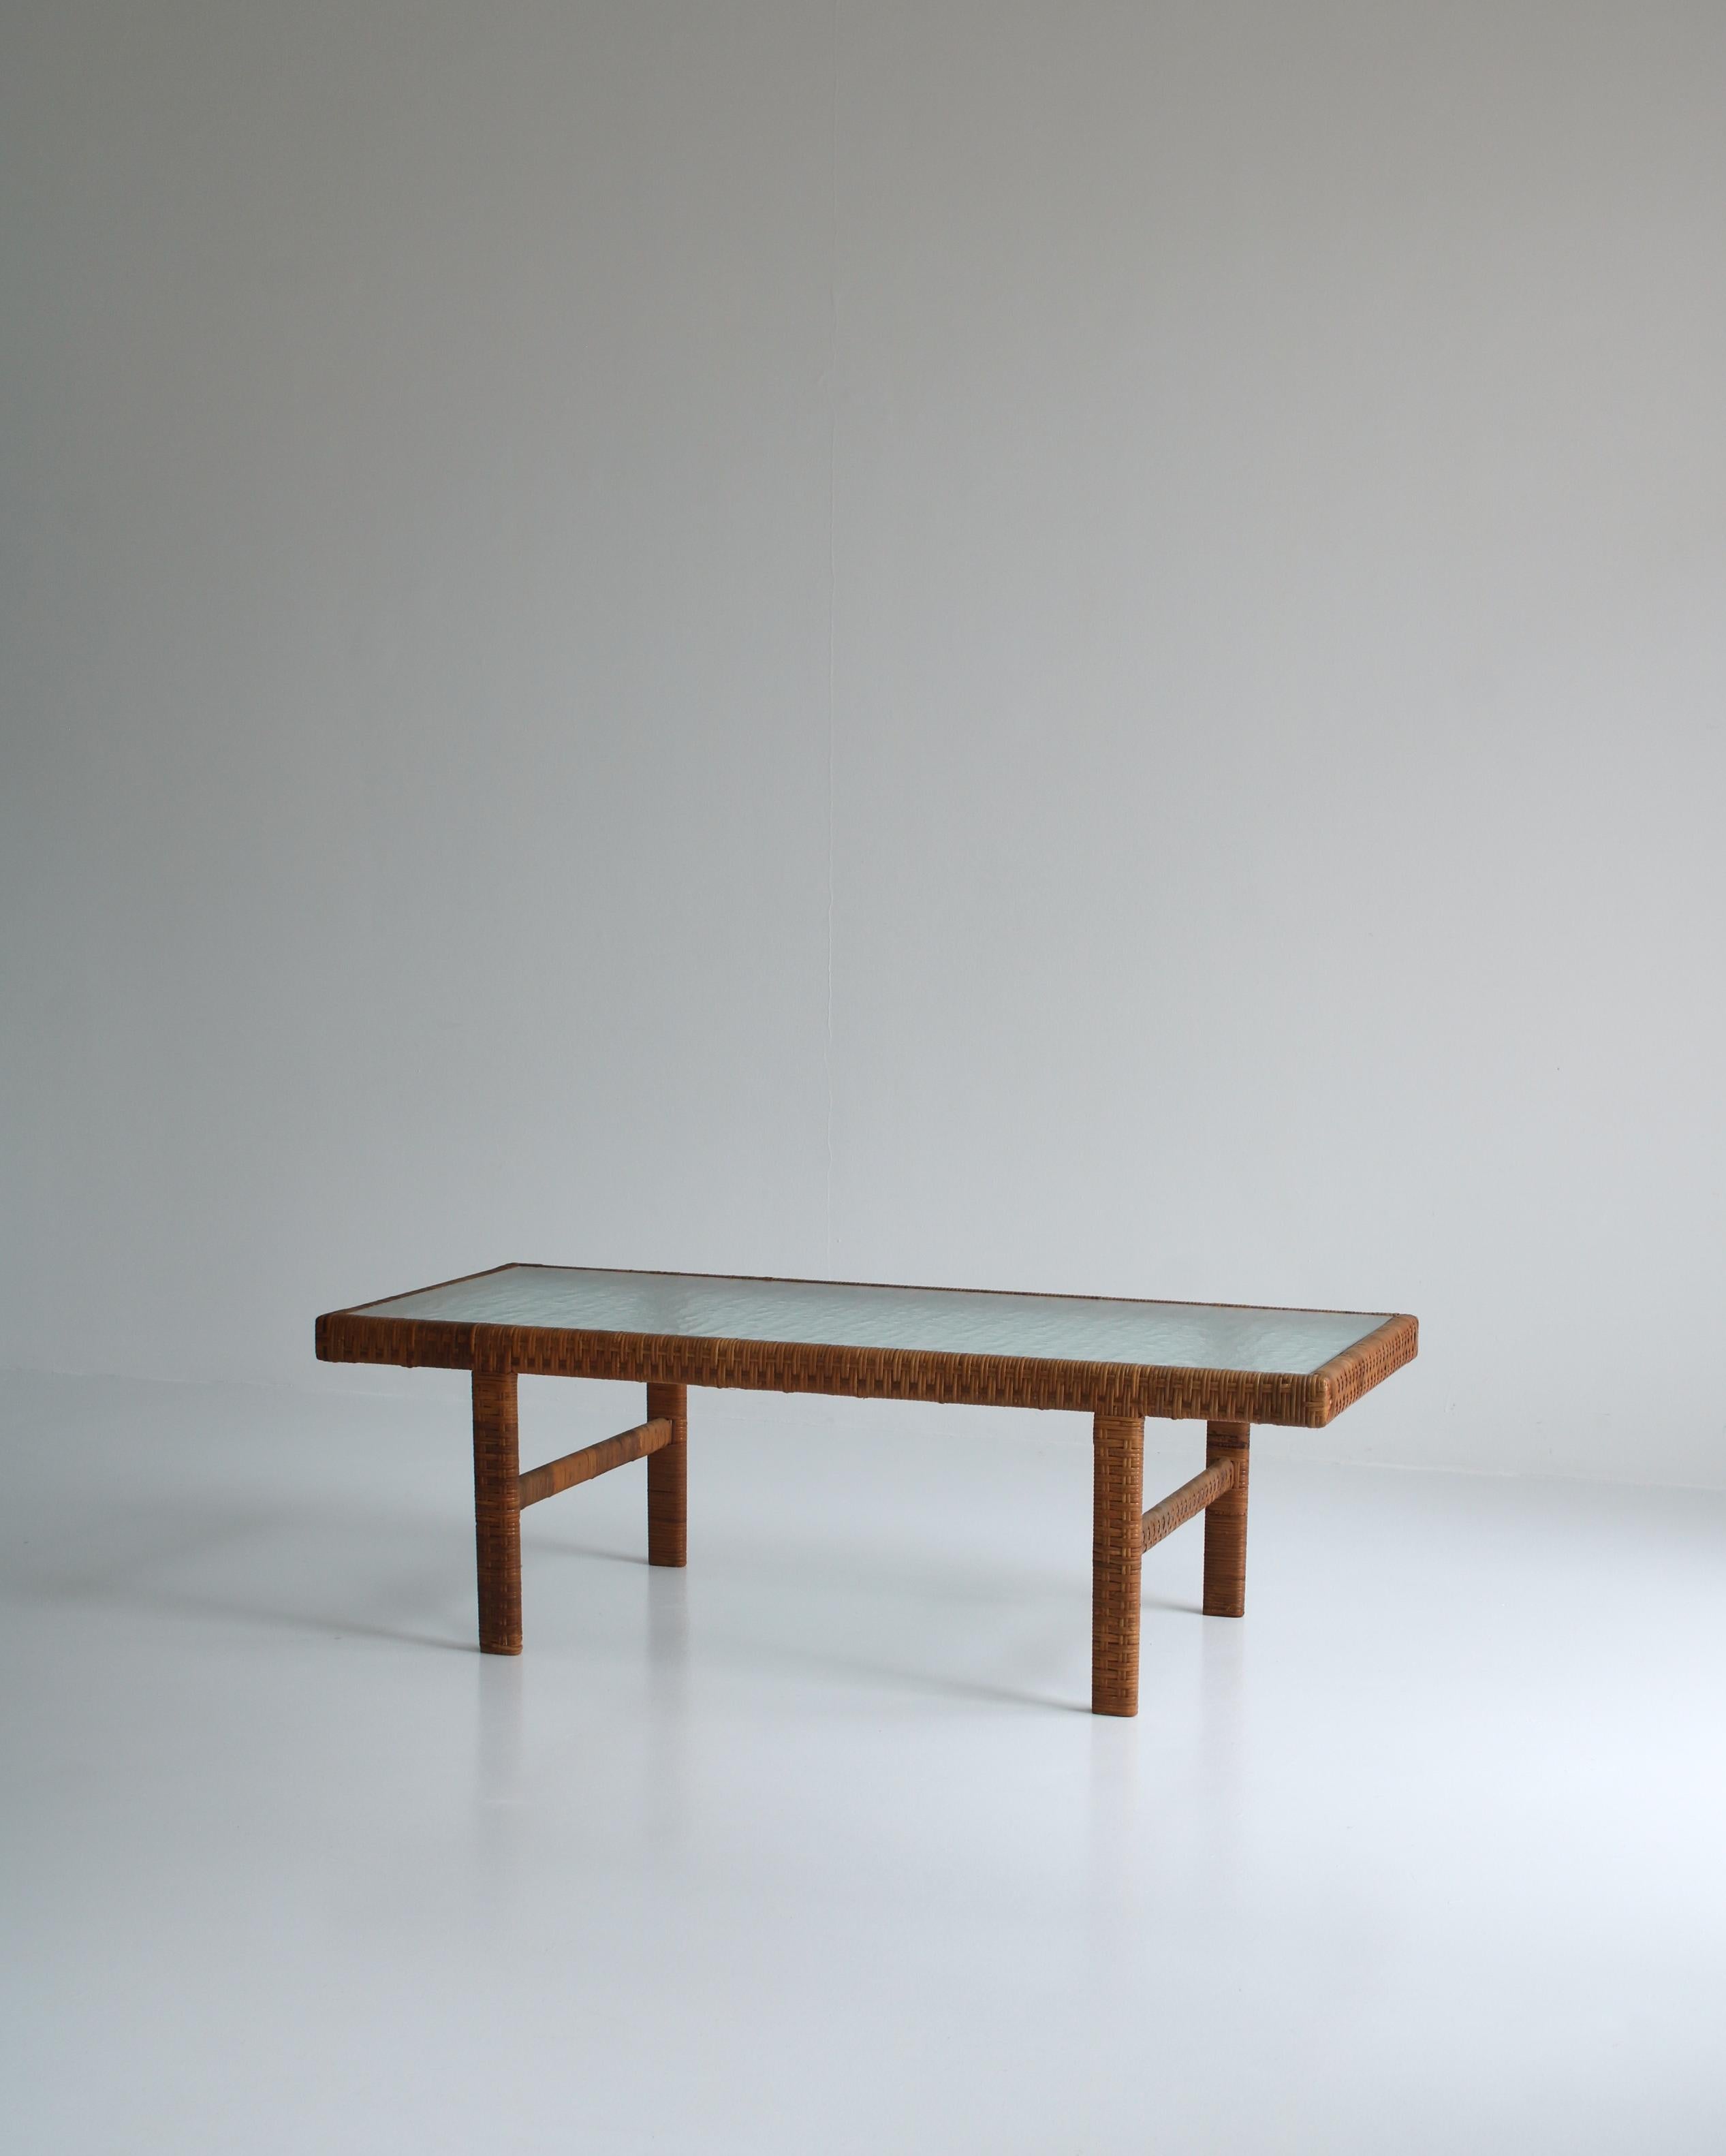 1940s Danish coffee table attributed to cabinetmaker R. Wengler, Copenhagen. The base is made from wood wrapped with rattan cane and the table top is matt / frosted glass. Beautiful patina to cane and original glass in great condition.